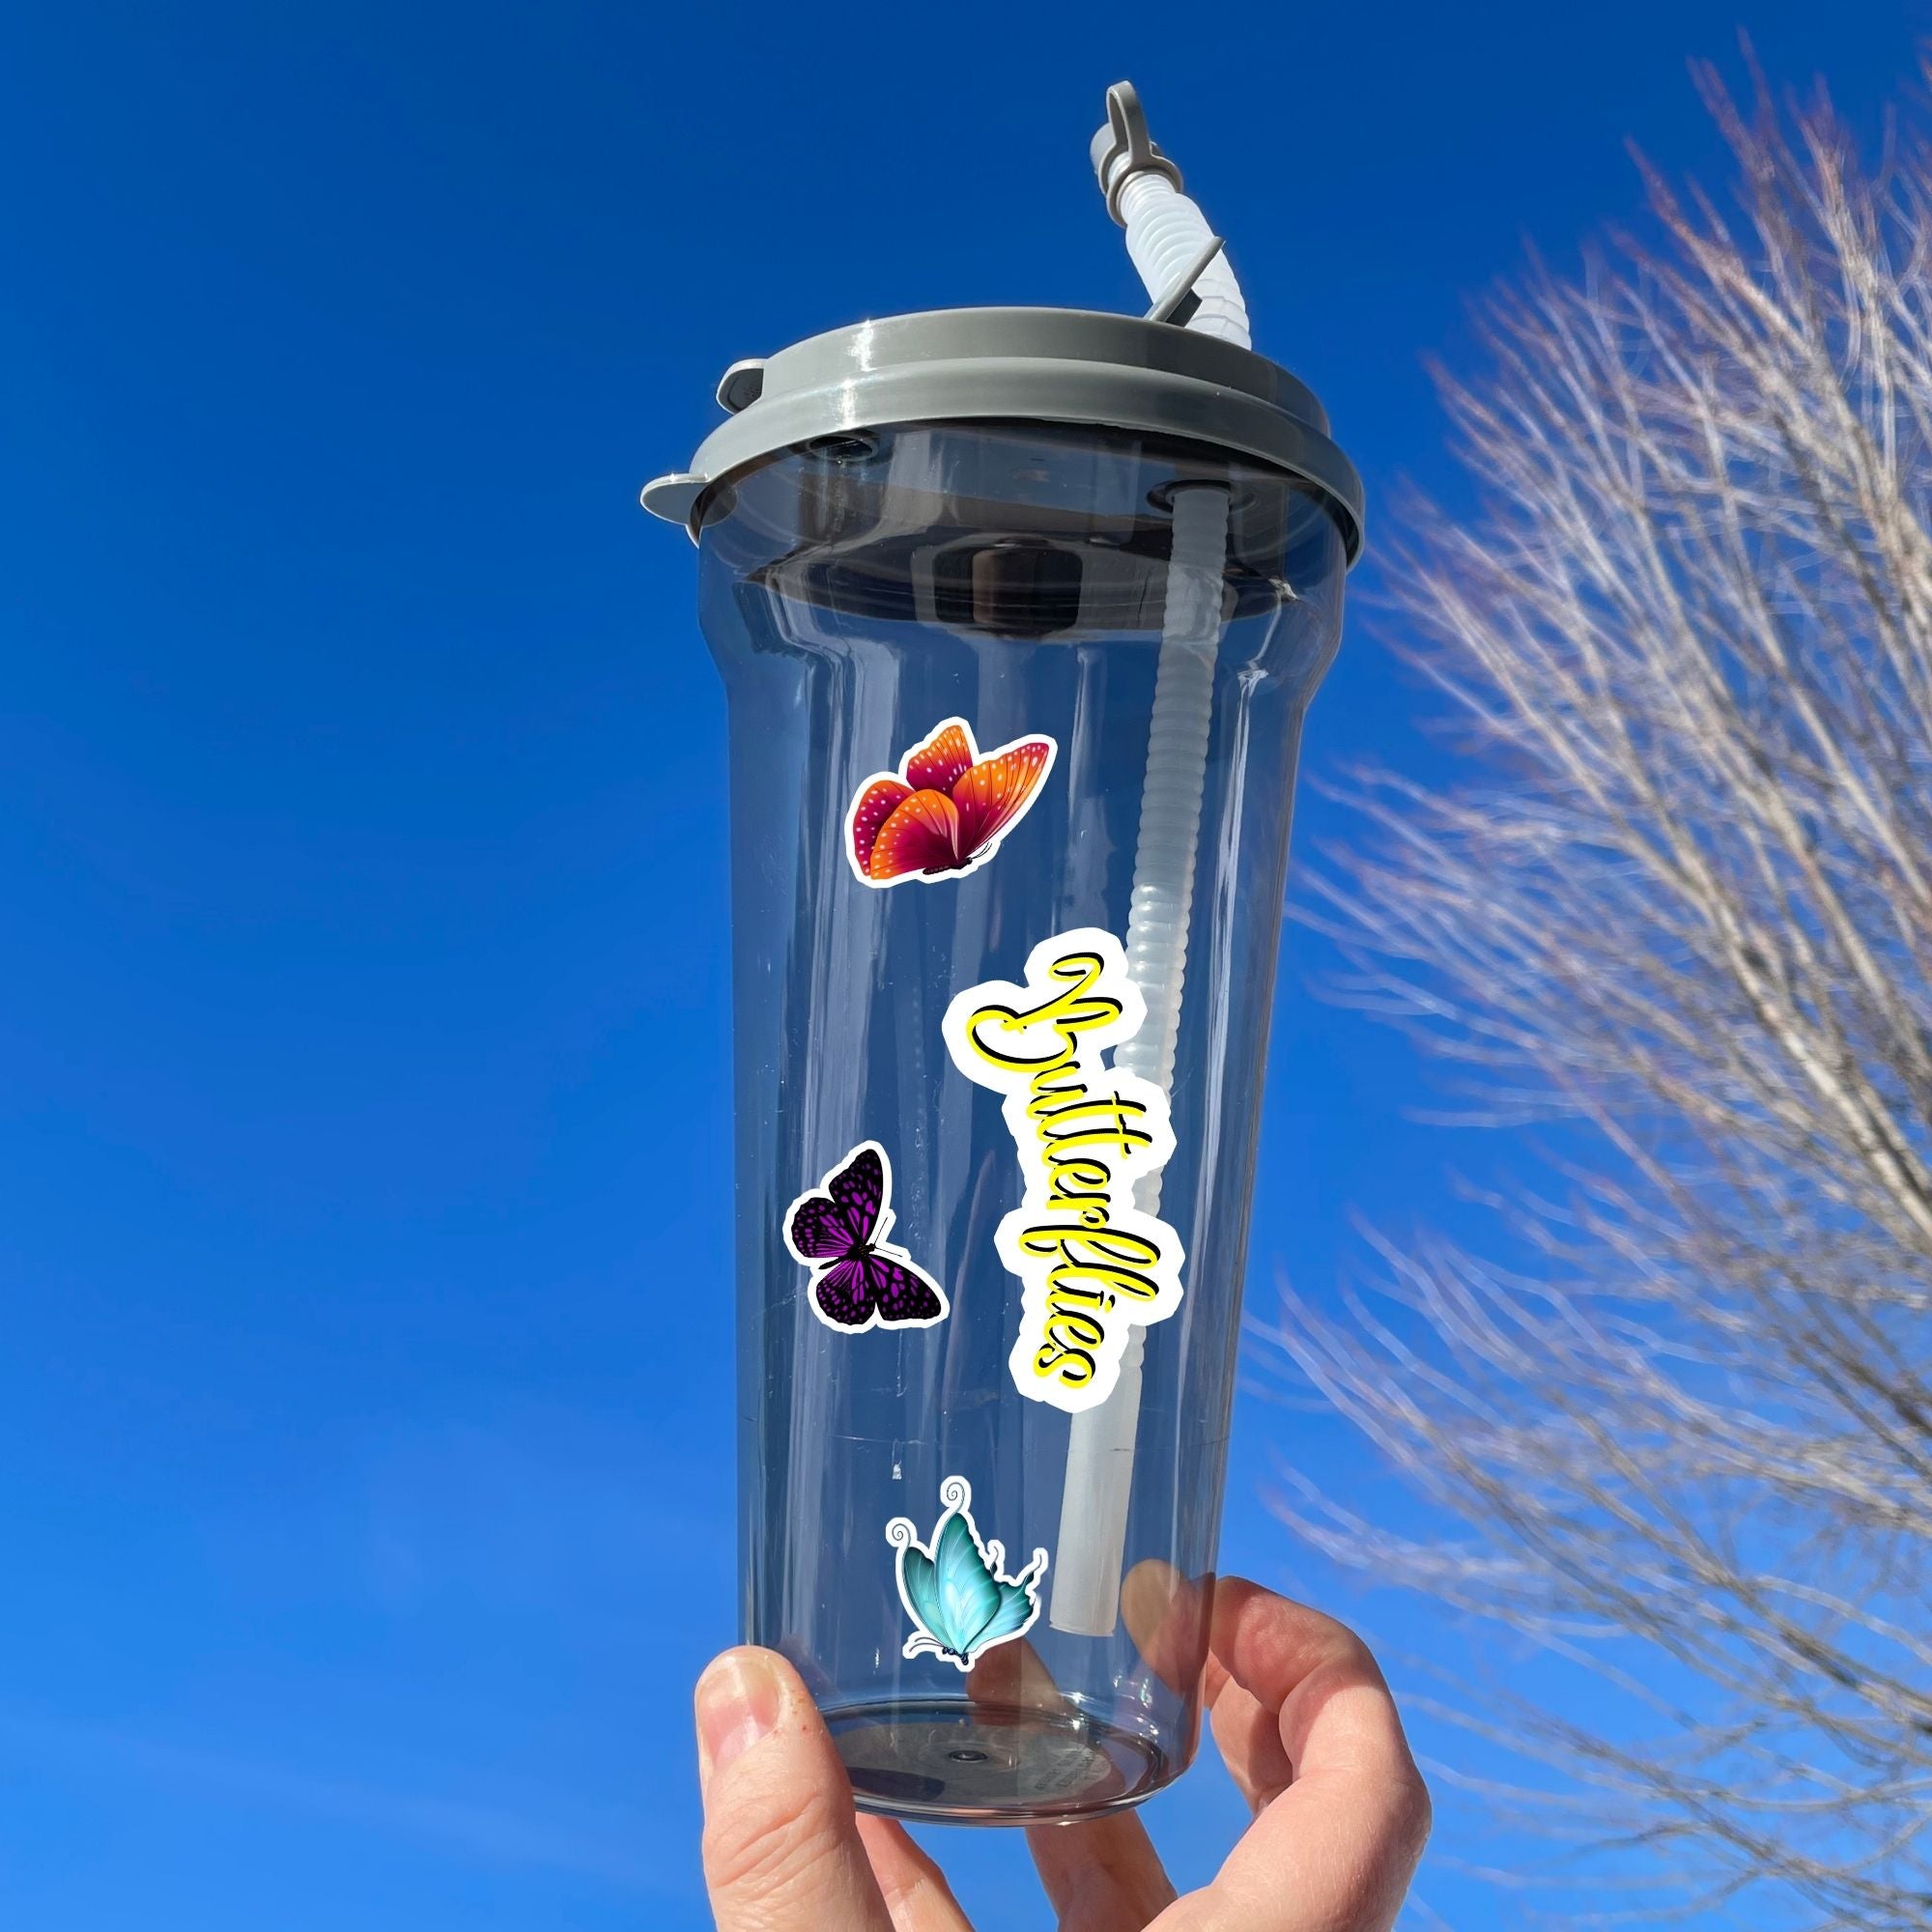 This image shows a water bottle with some of the Butterfly stickers applied.